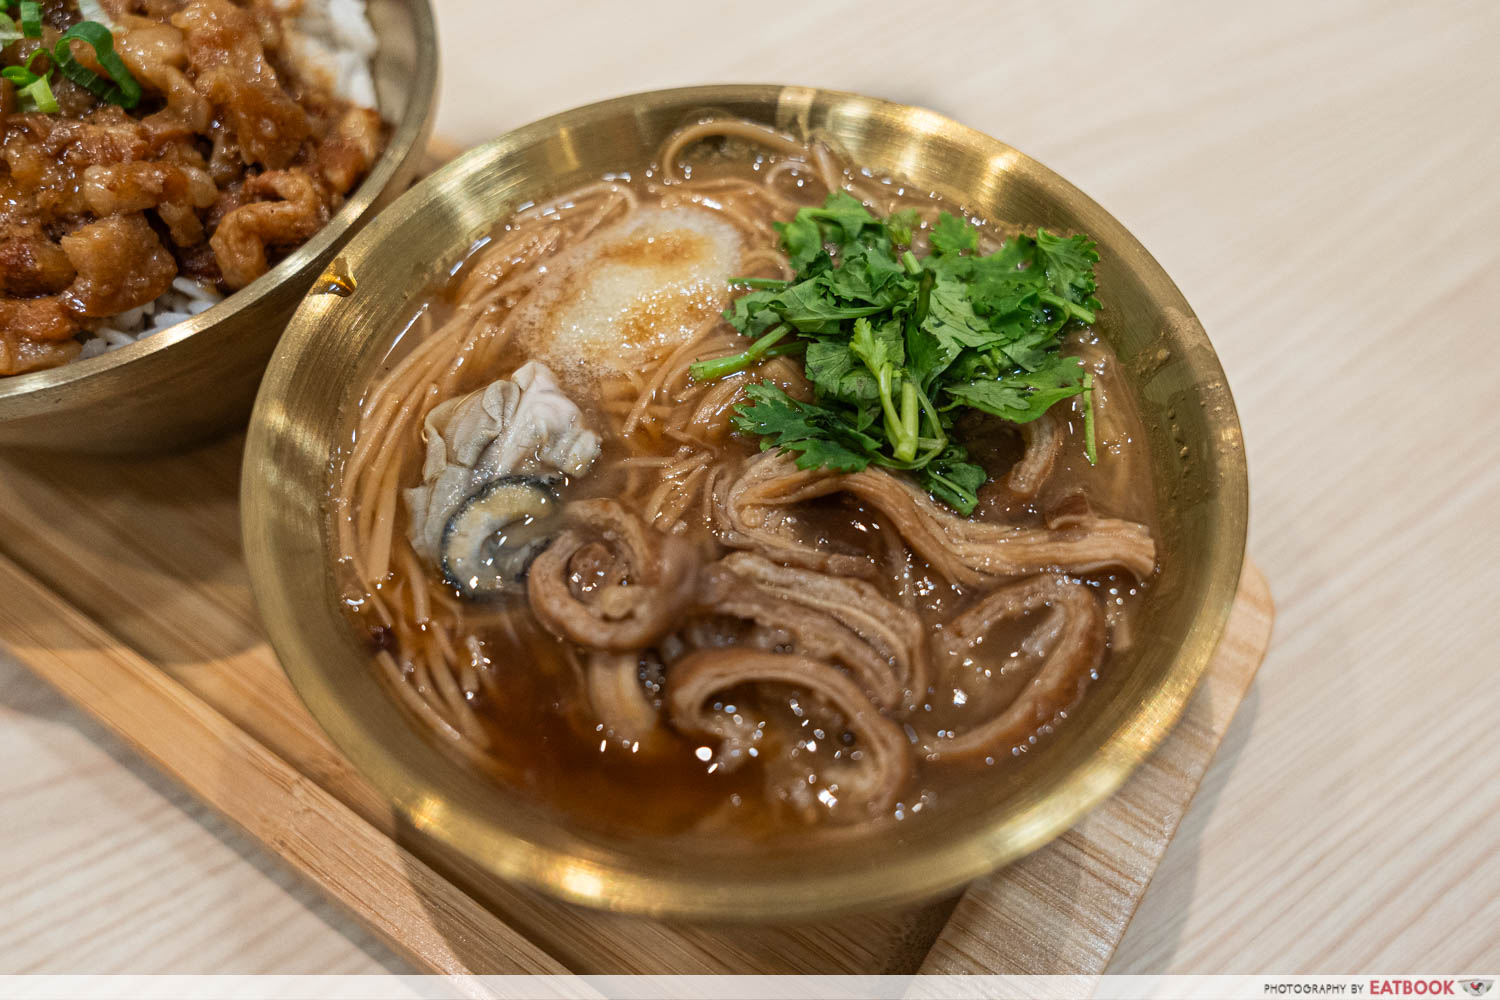 north-east-cafes-eat-3-bowls-oyster-and-pig-intestine-mee-sua